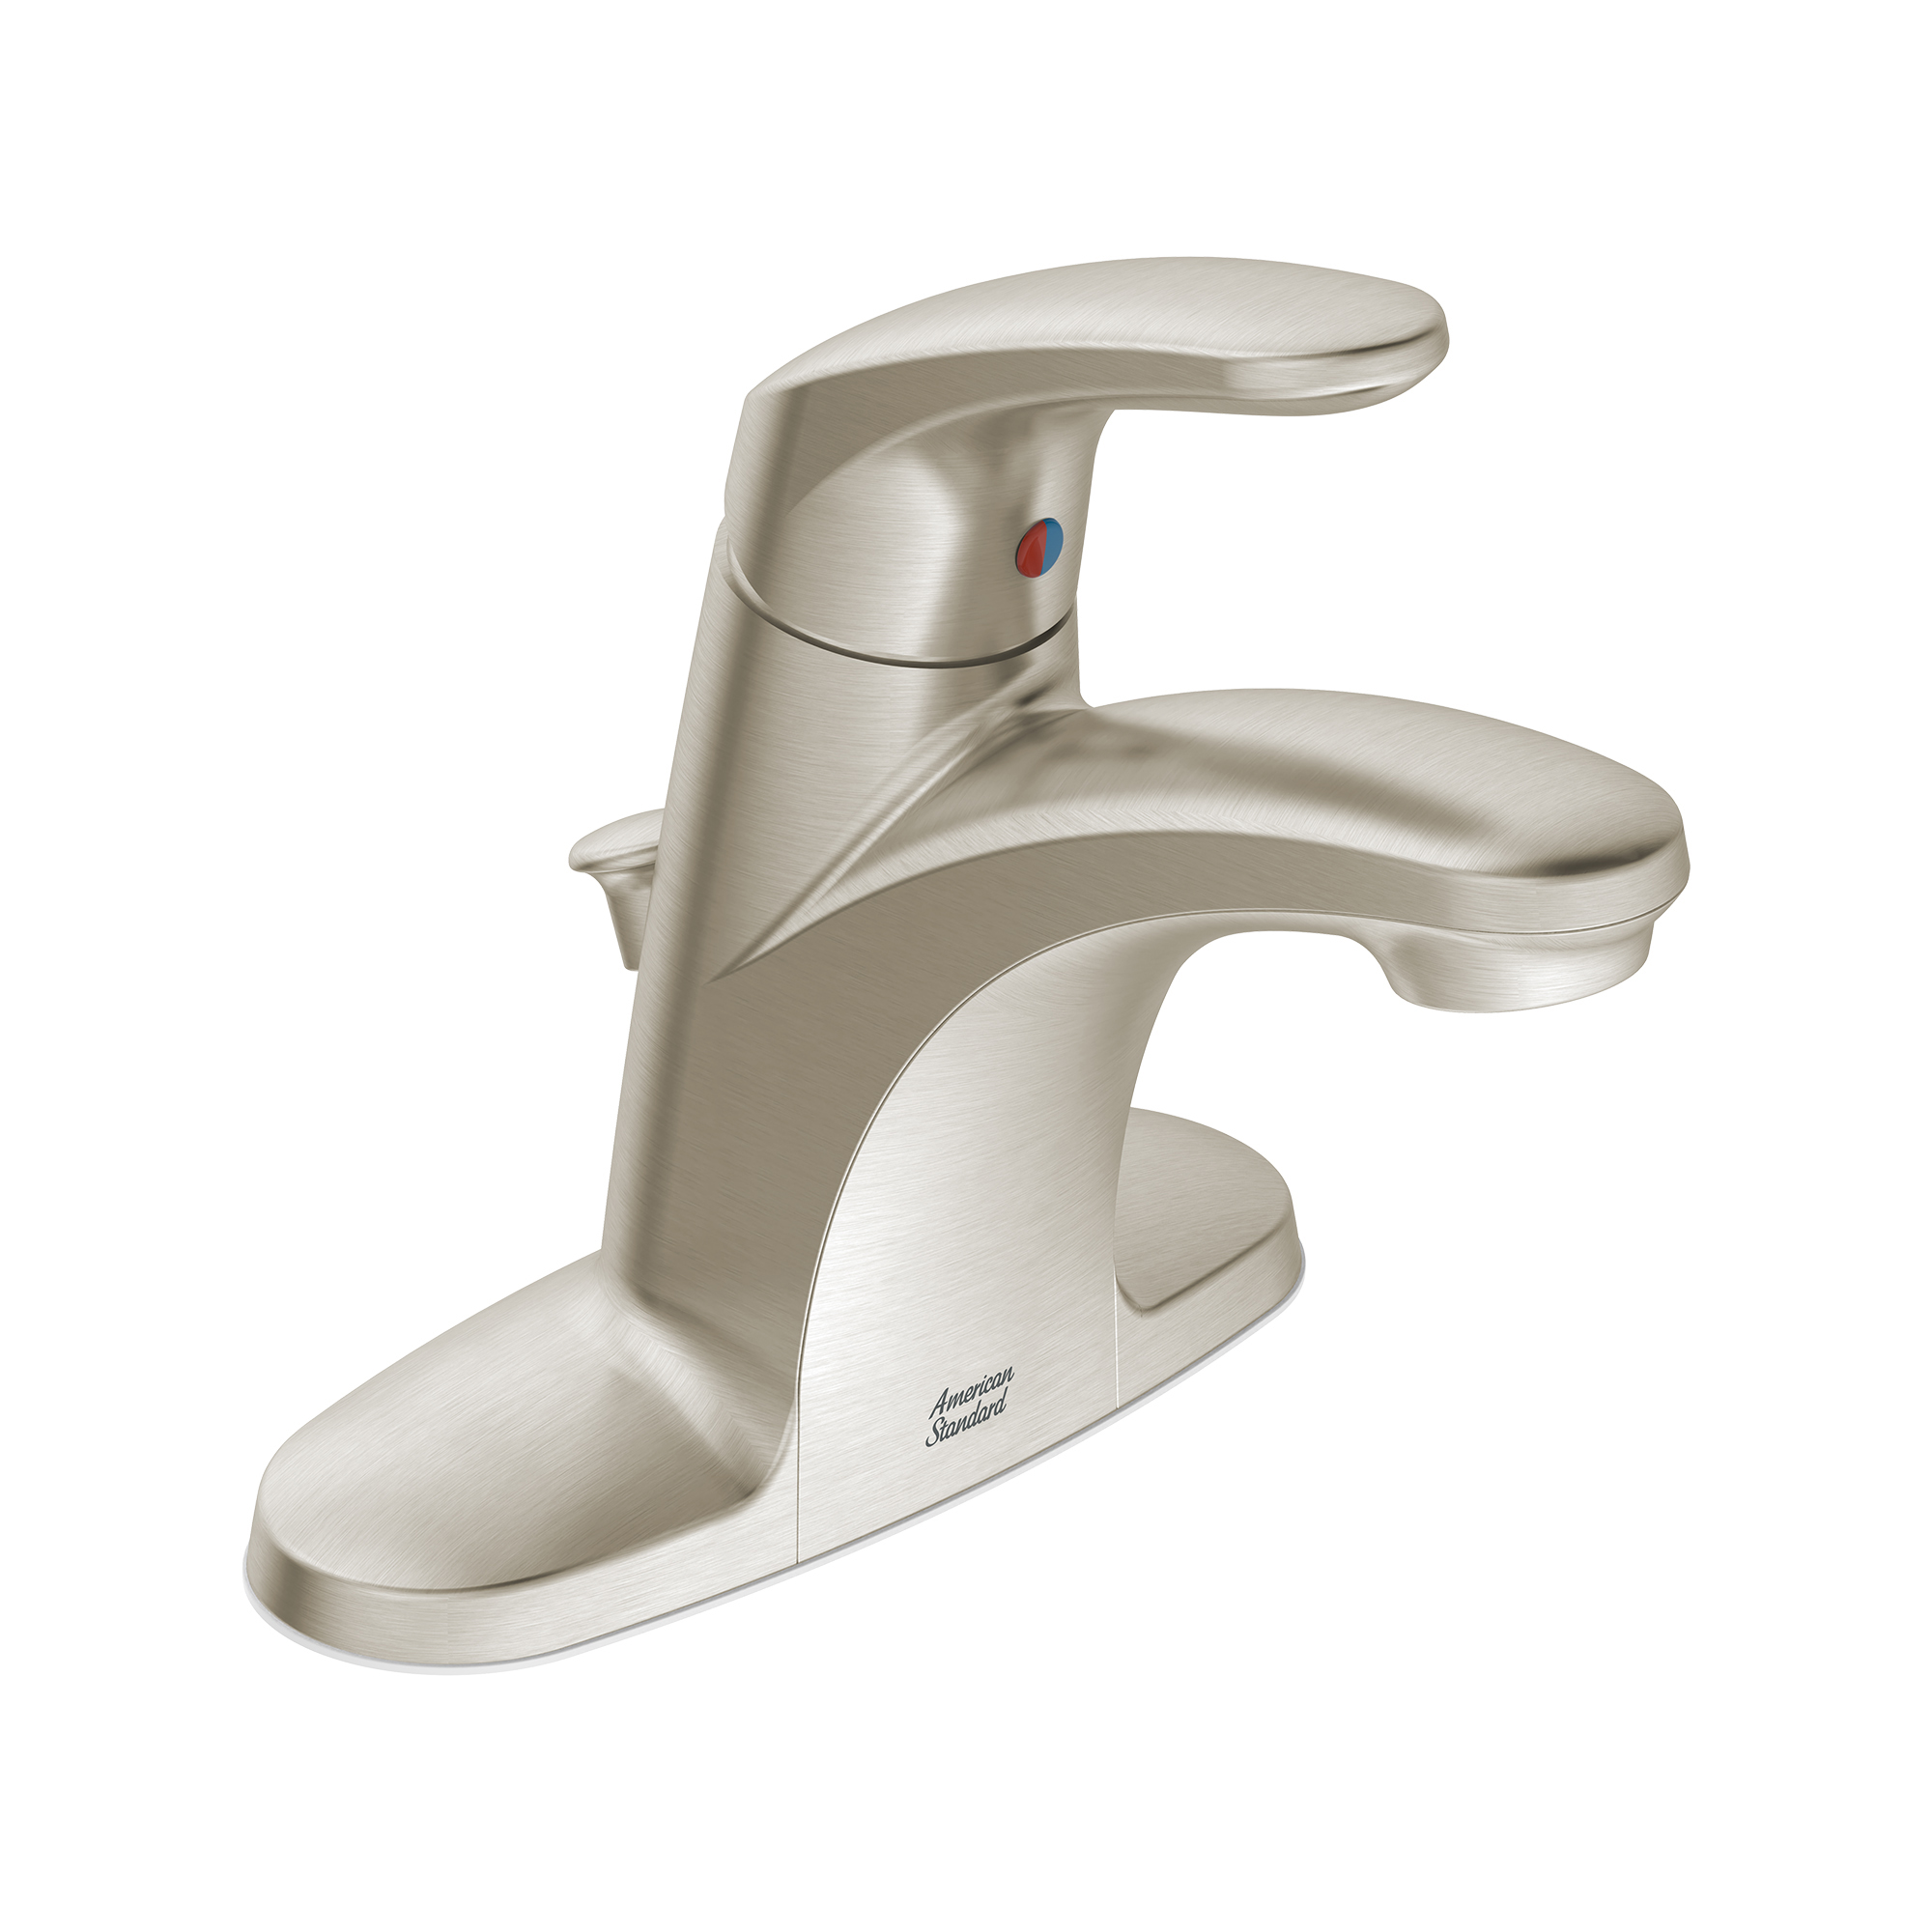 Colony® PRO 4-Inch Centerset Single-Handle Bathroom Faucet 1.2 gpm/4.5 Lpm With Lever Handle